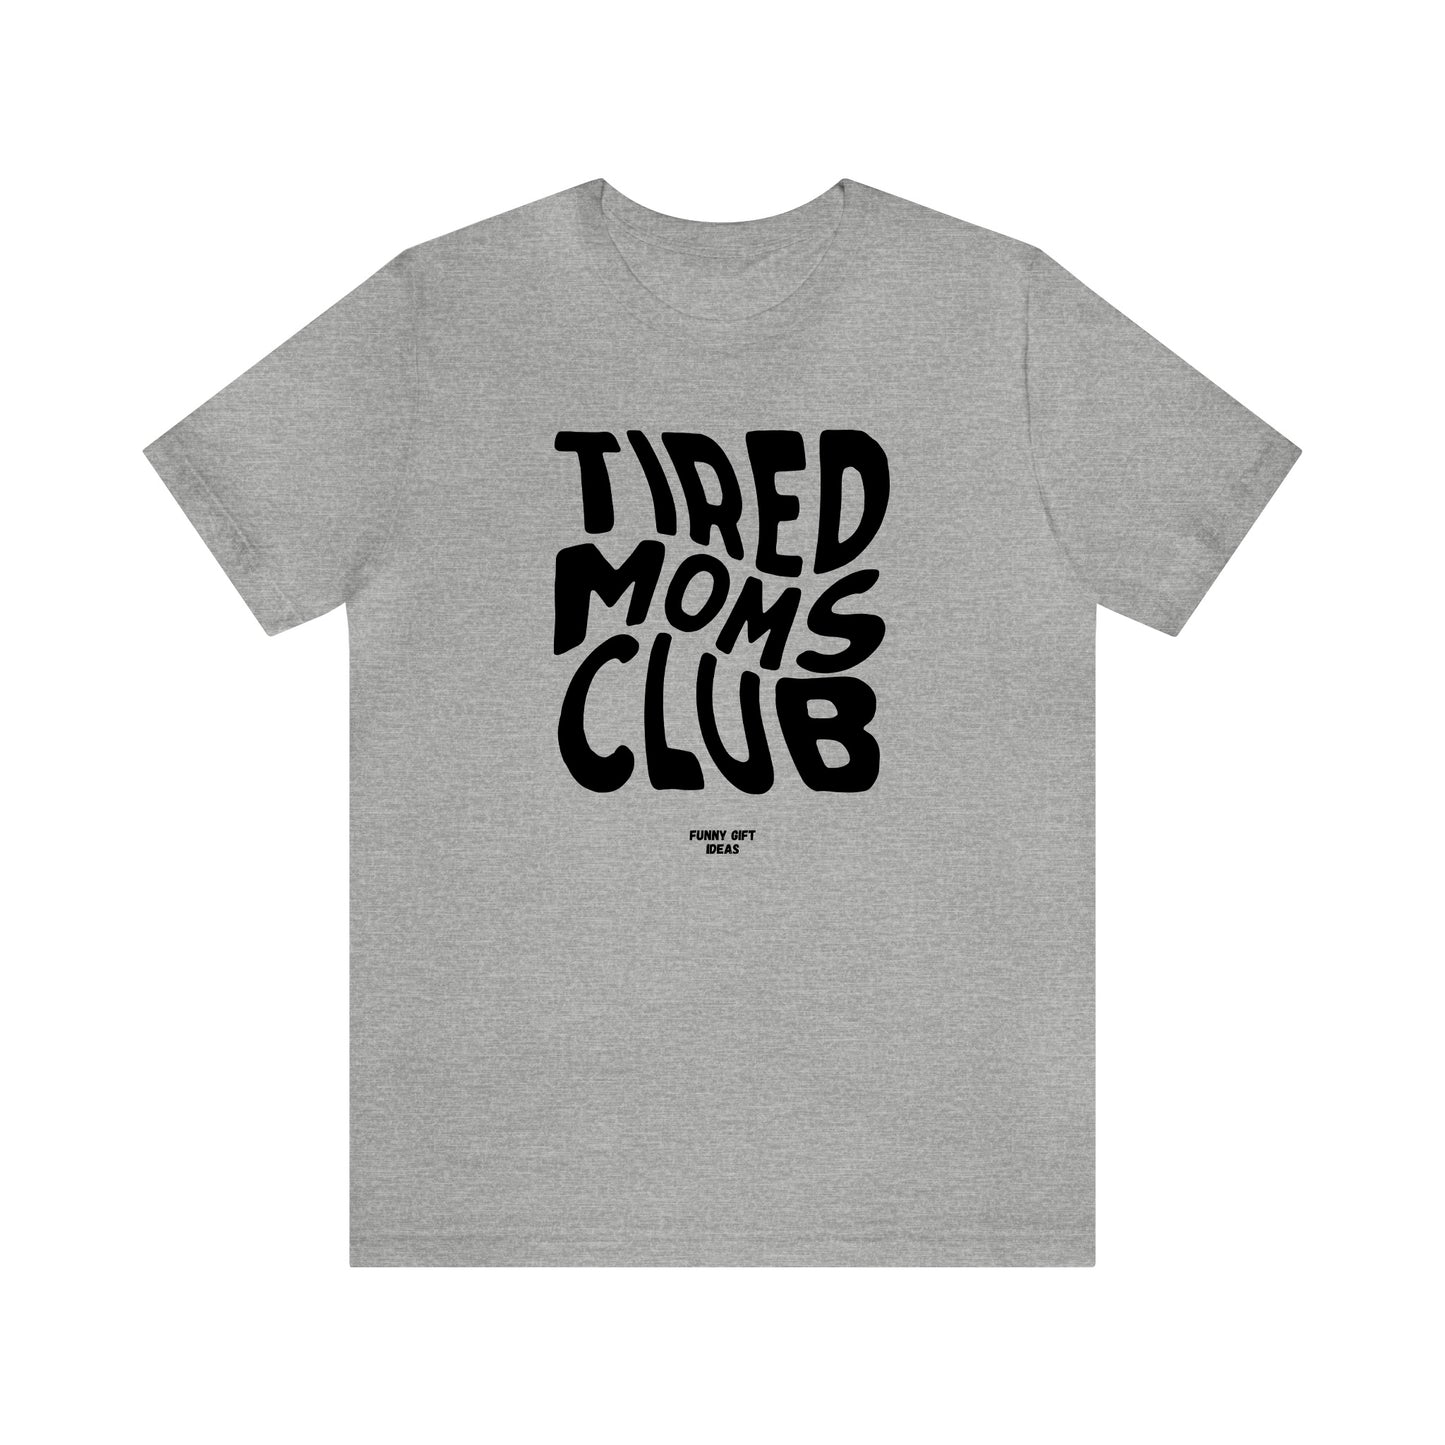 Funny Shirts for Women - Tired Moms Club - Women's T Shirts